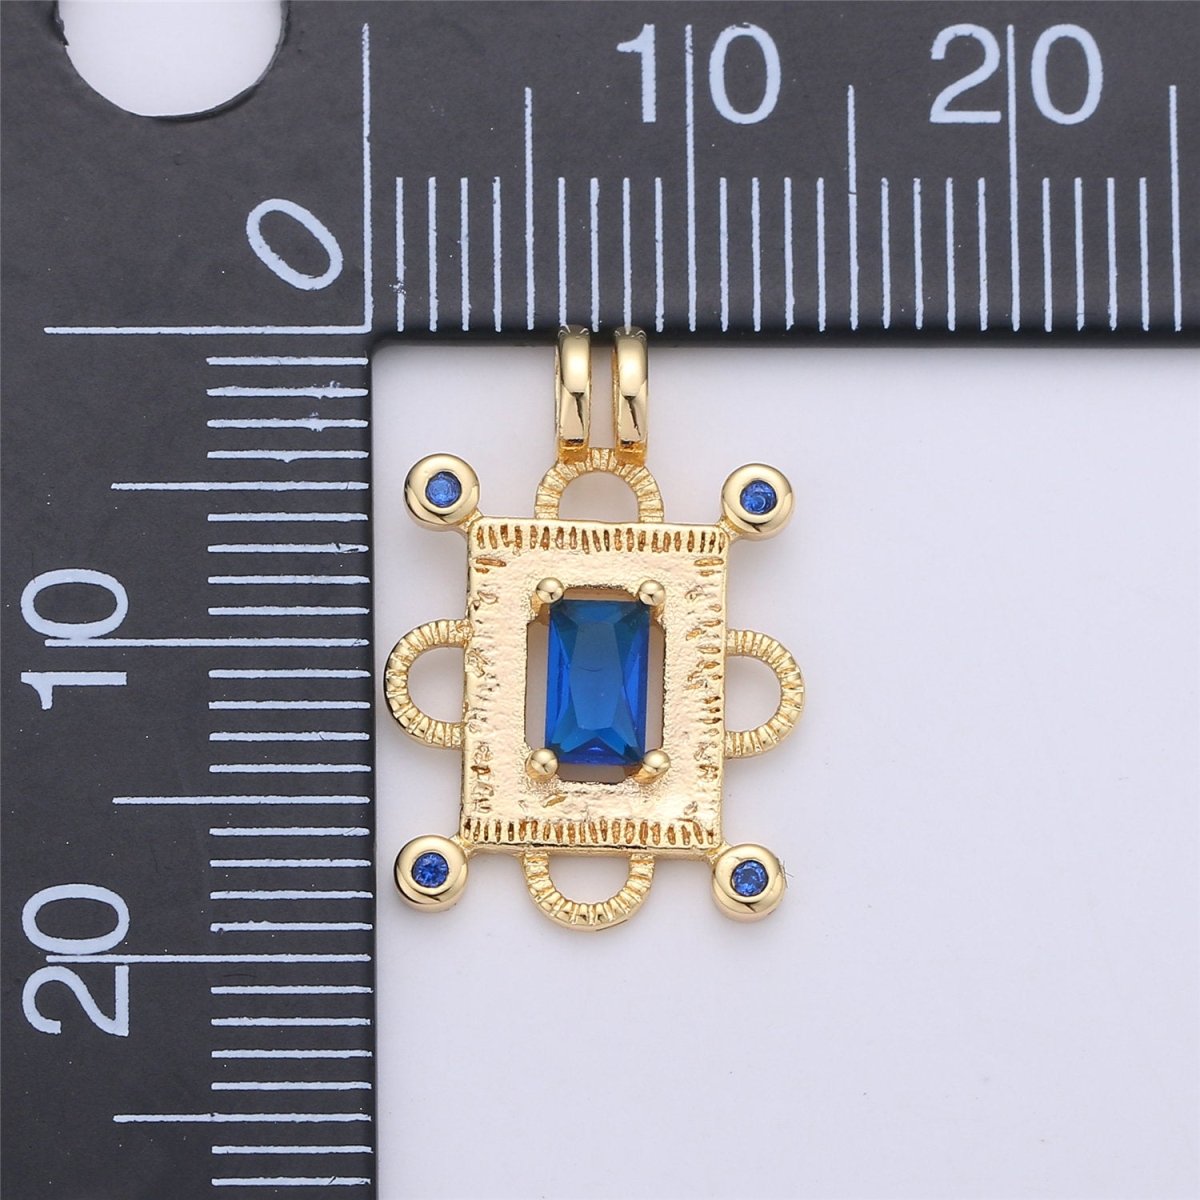 24k Gold Filled Charm Gold Rectangle Pendant Blue Cubic Charm for Necklace Jewelry Making Supply 20x14mm C-673 - DLUXCA